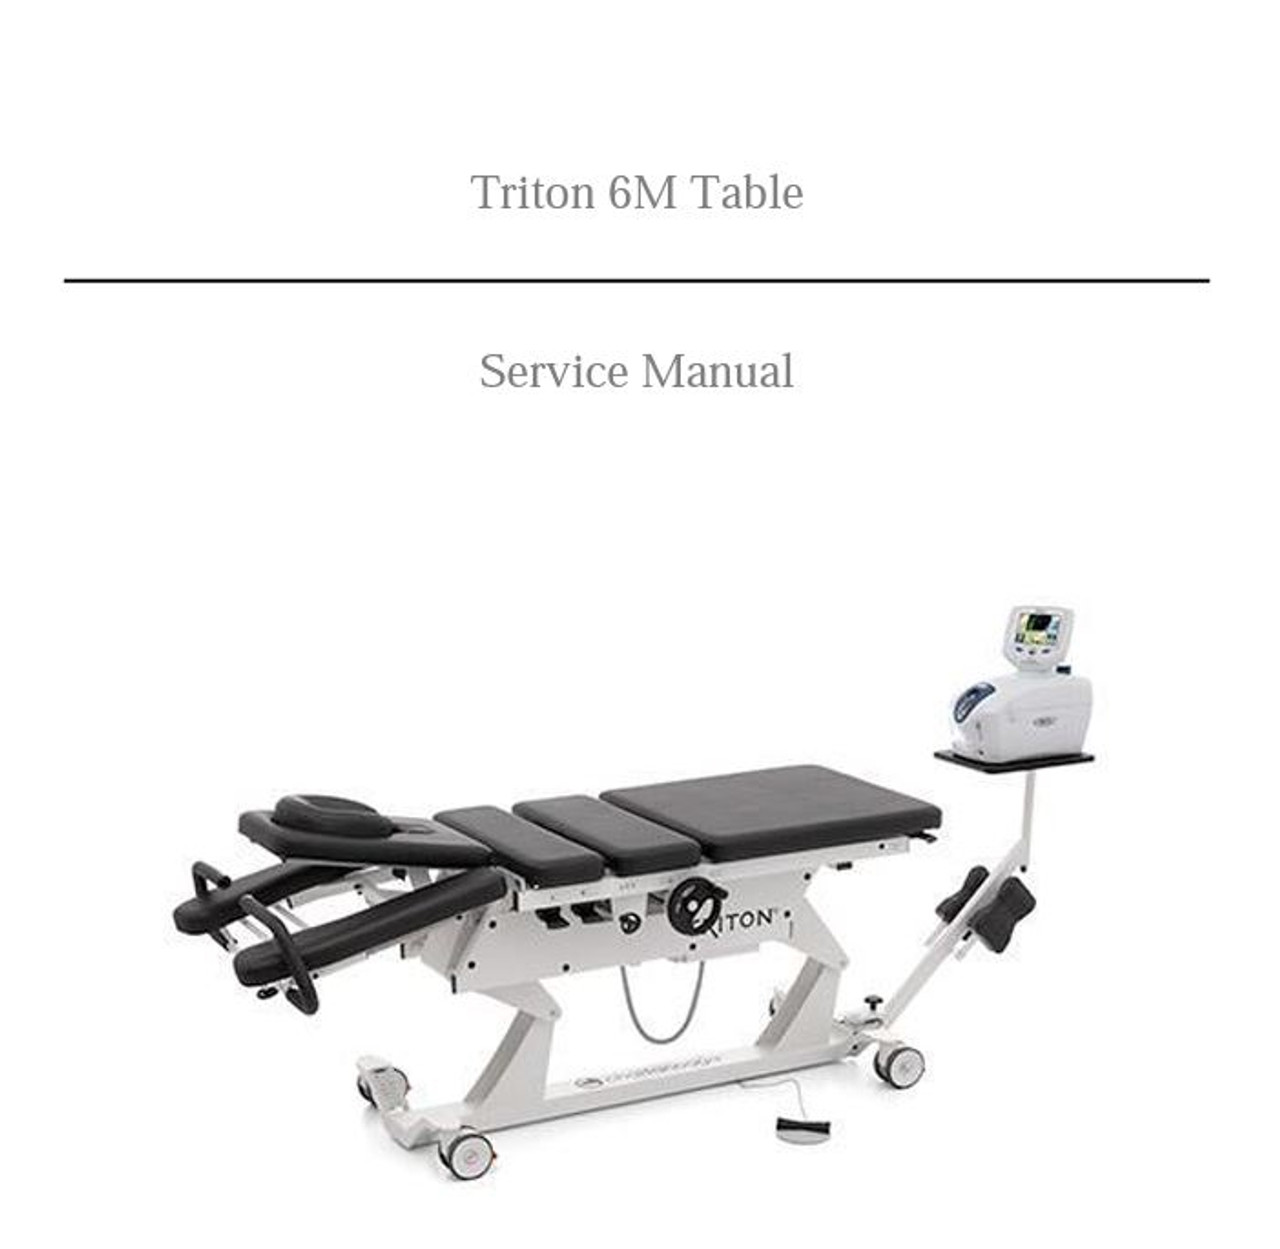 Looking for a Chattanooga Triton 6M Service Manual, Chattanooga 6M Table, Chattanooga Triton Table, Triton 6M Manual, Chattanooga Manual, Chattanooga 6M, Chattanooga Decompression Table Manual, 6M Manual?